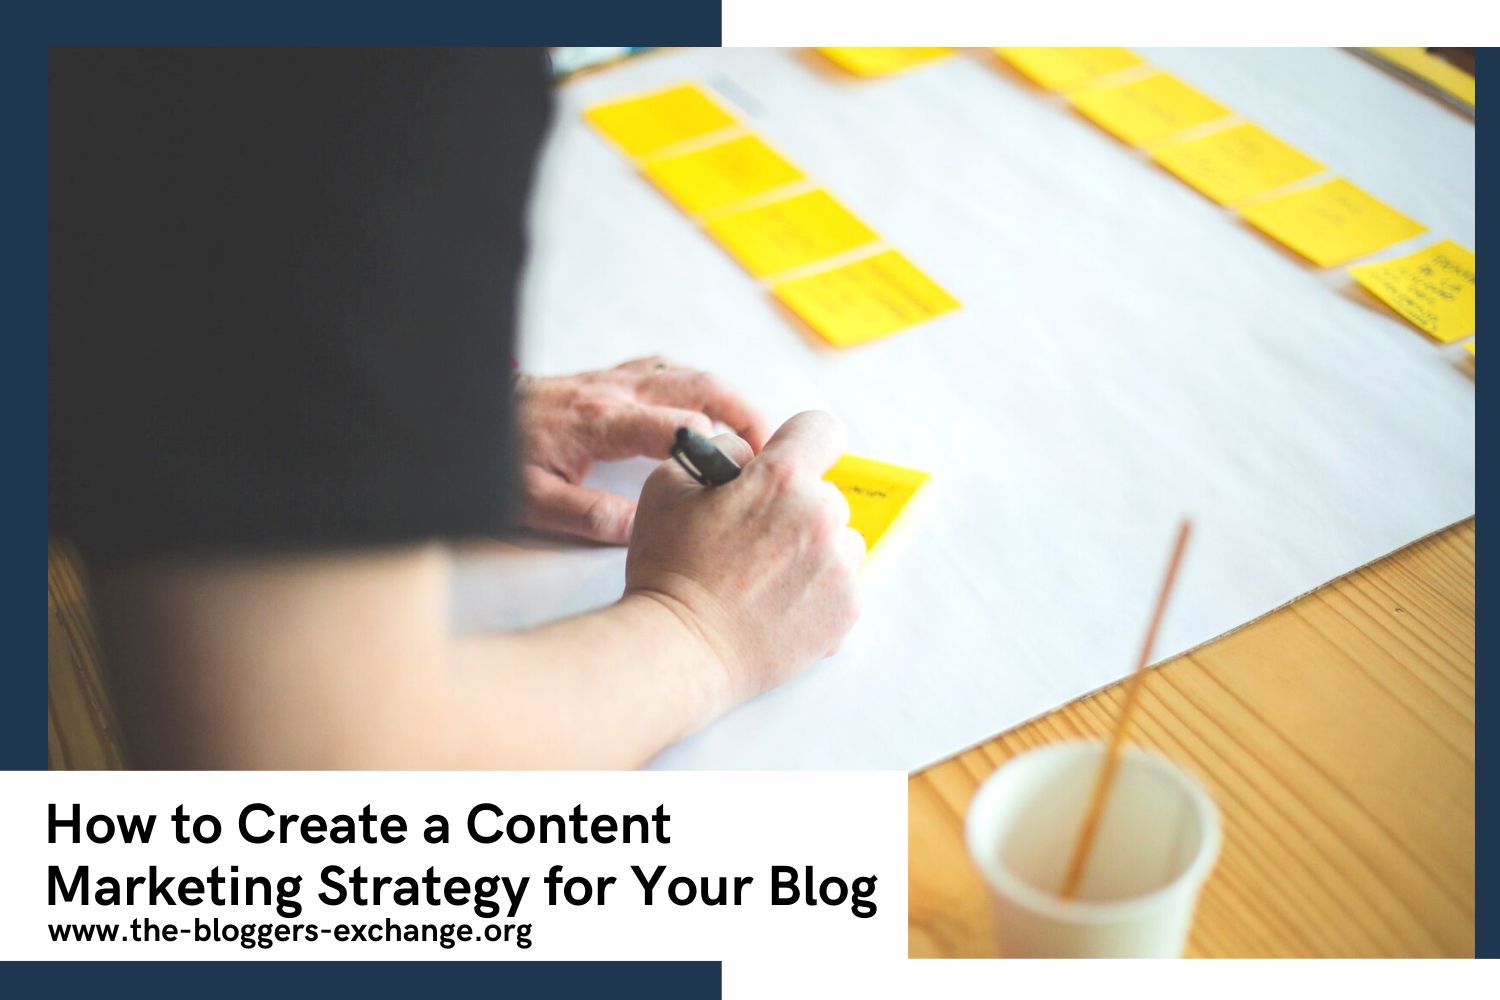 notes-on-how-to-create-a-content-marketing-strategy-for-your-blog